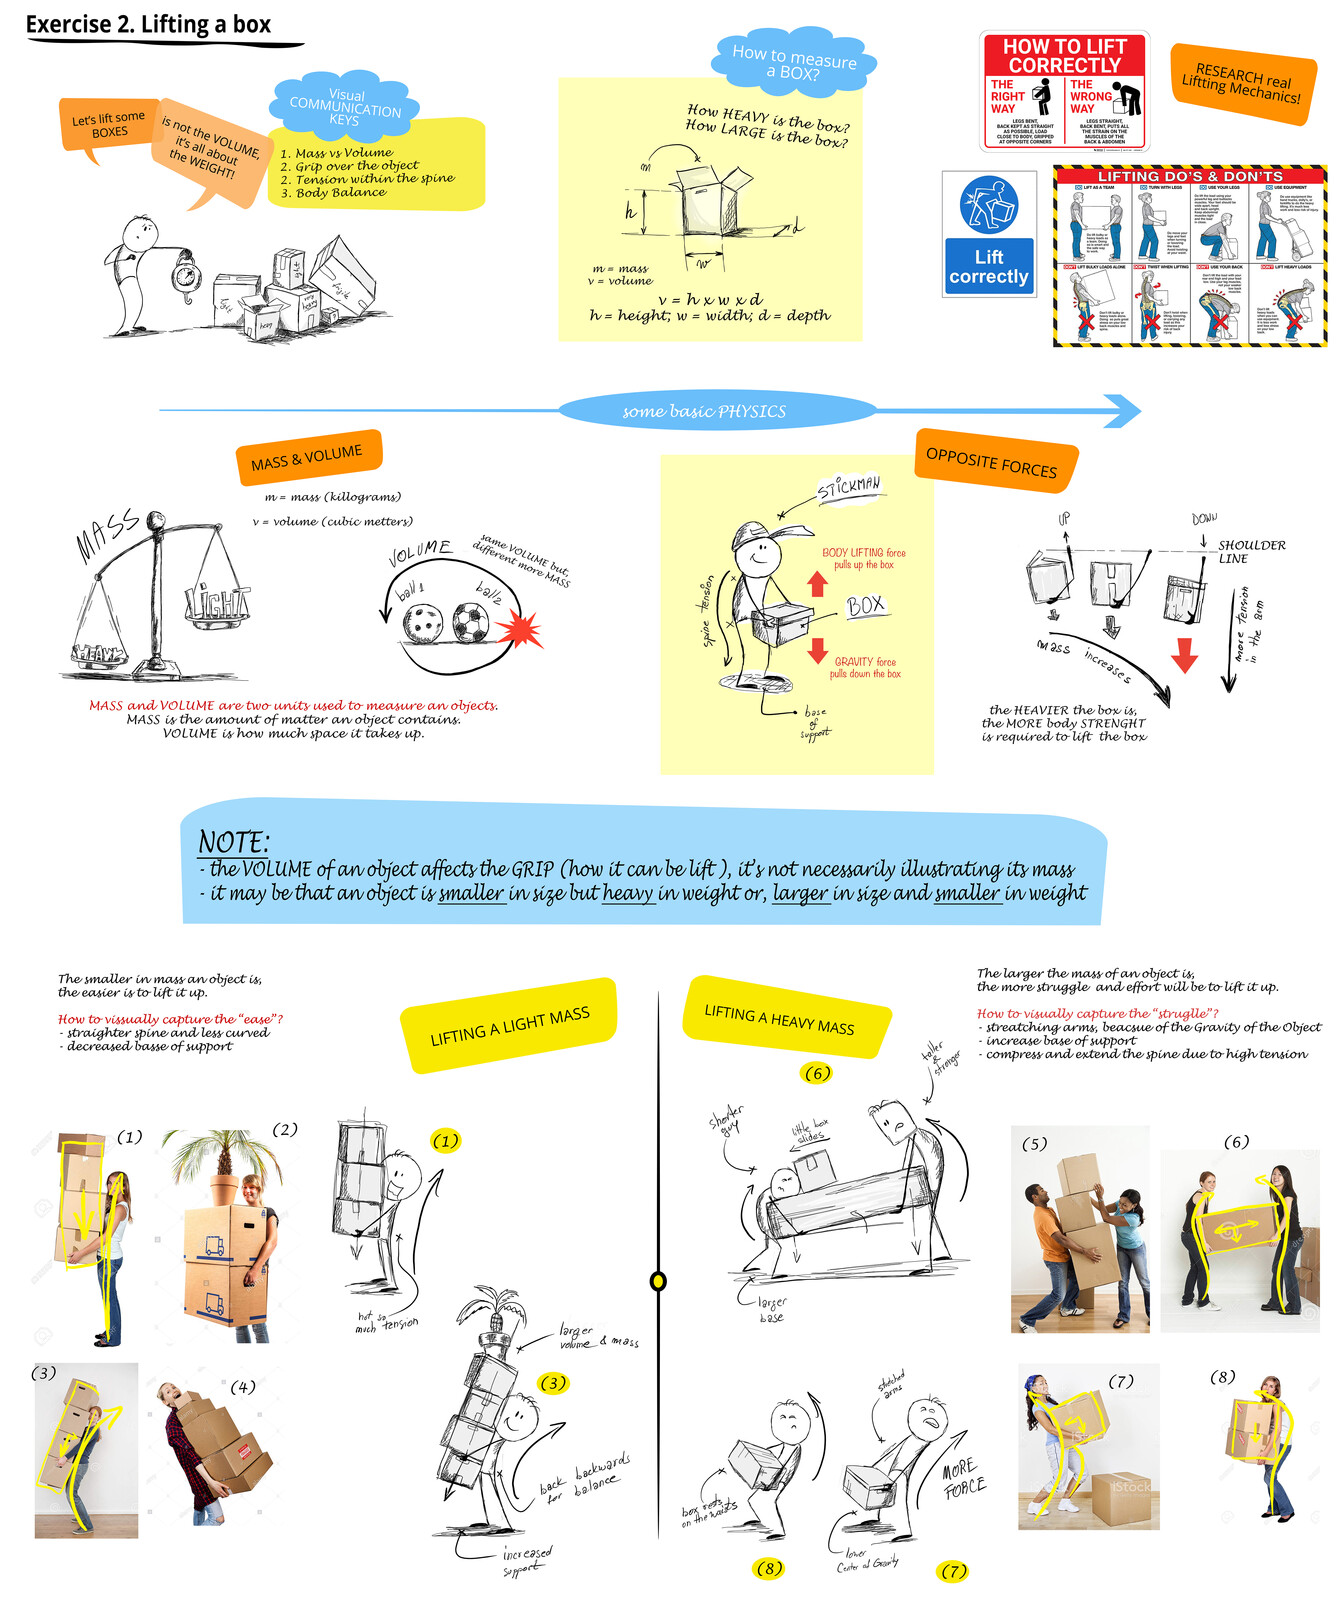 Exercise 2. Box Lift Postures. Exploration of multiple poses, in different scenarios of lifting various boxes (objects) in terms of volume and mass.